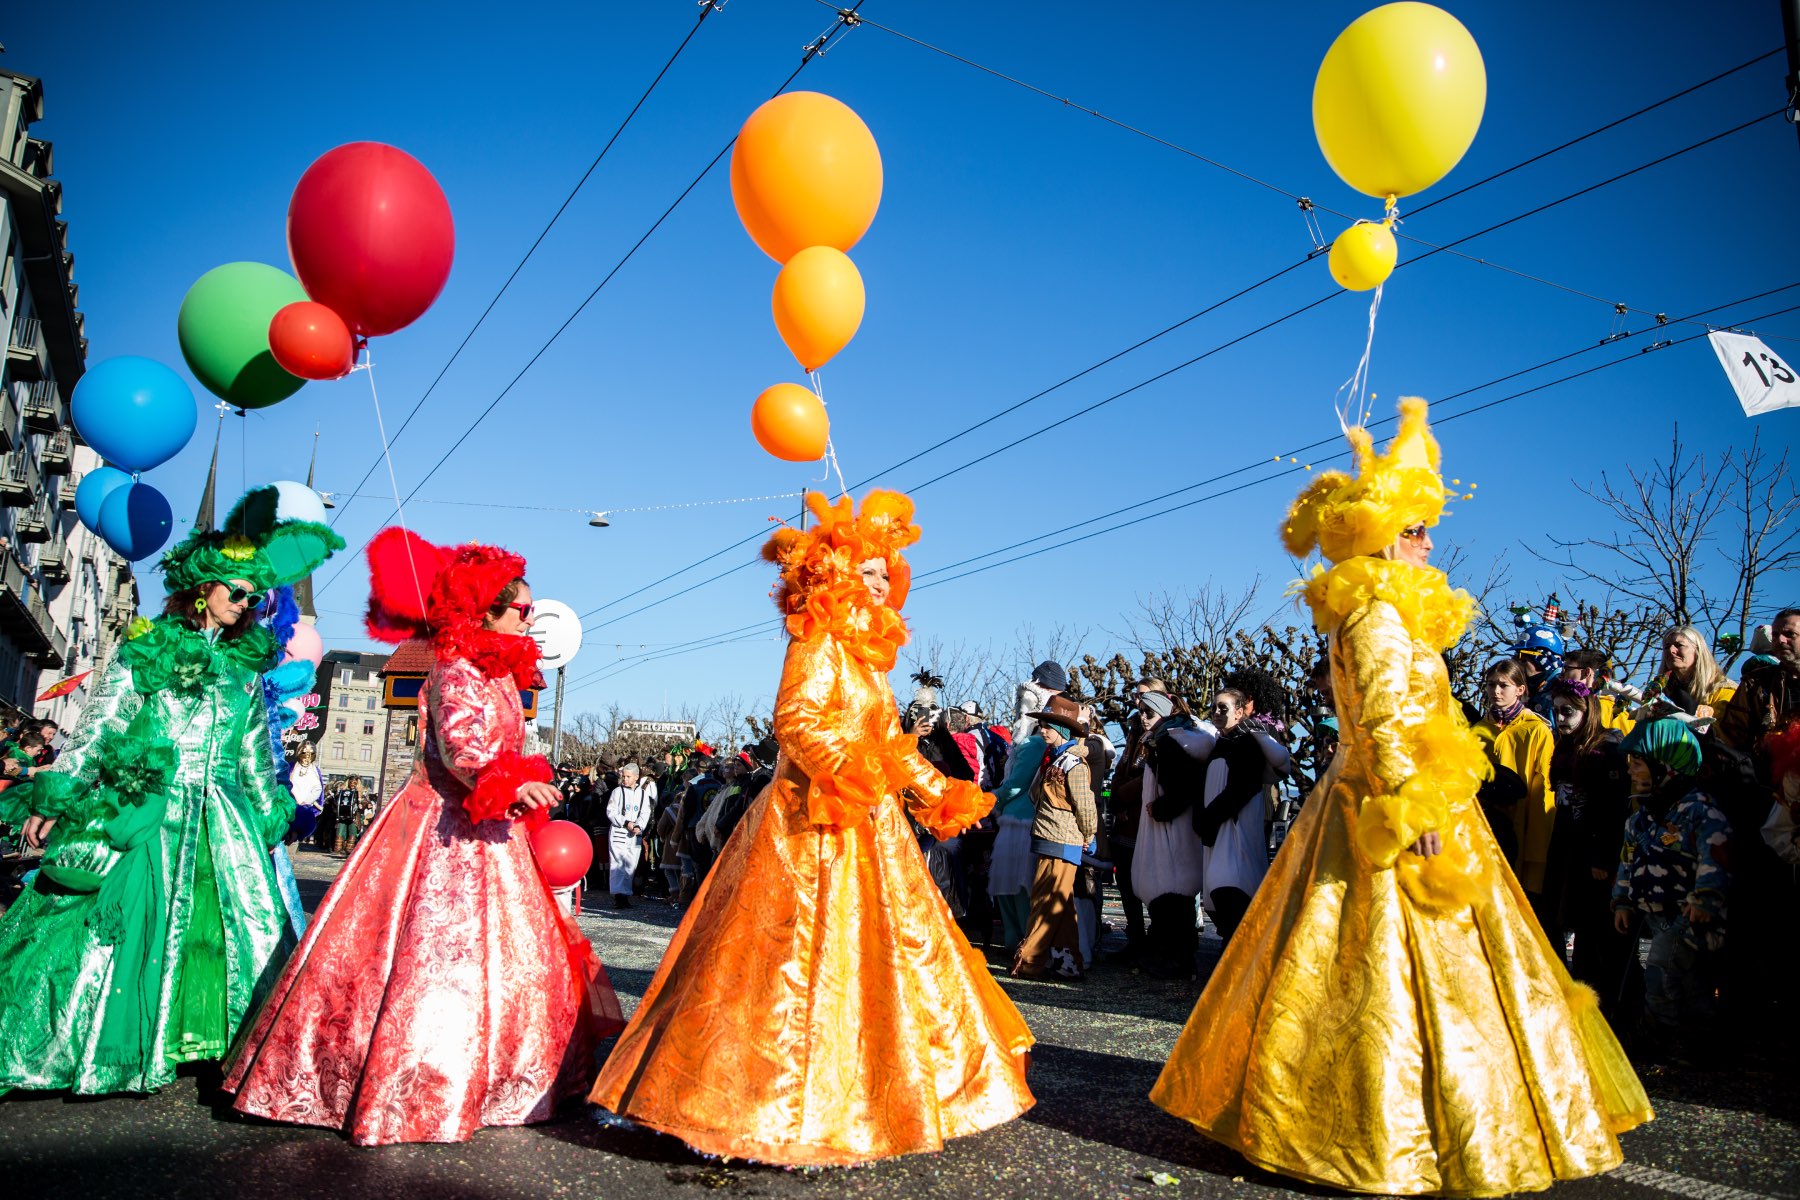 Four women dressed individually in yellow, orange, red, and green ballroom dresses carry balloons as part of Lucerne's carnival celebrations